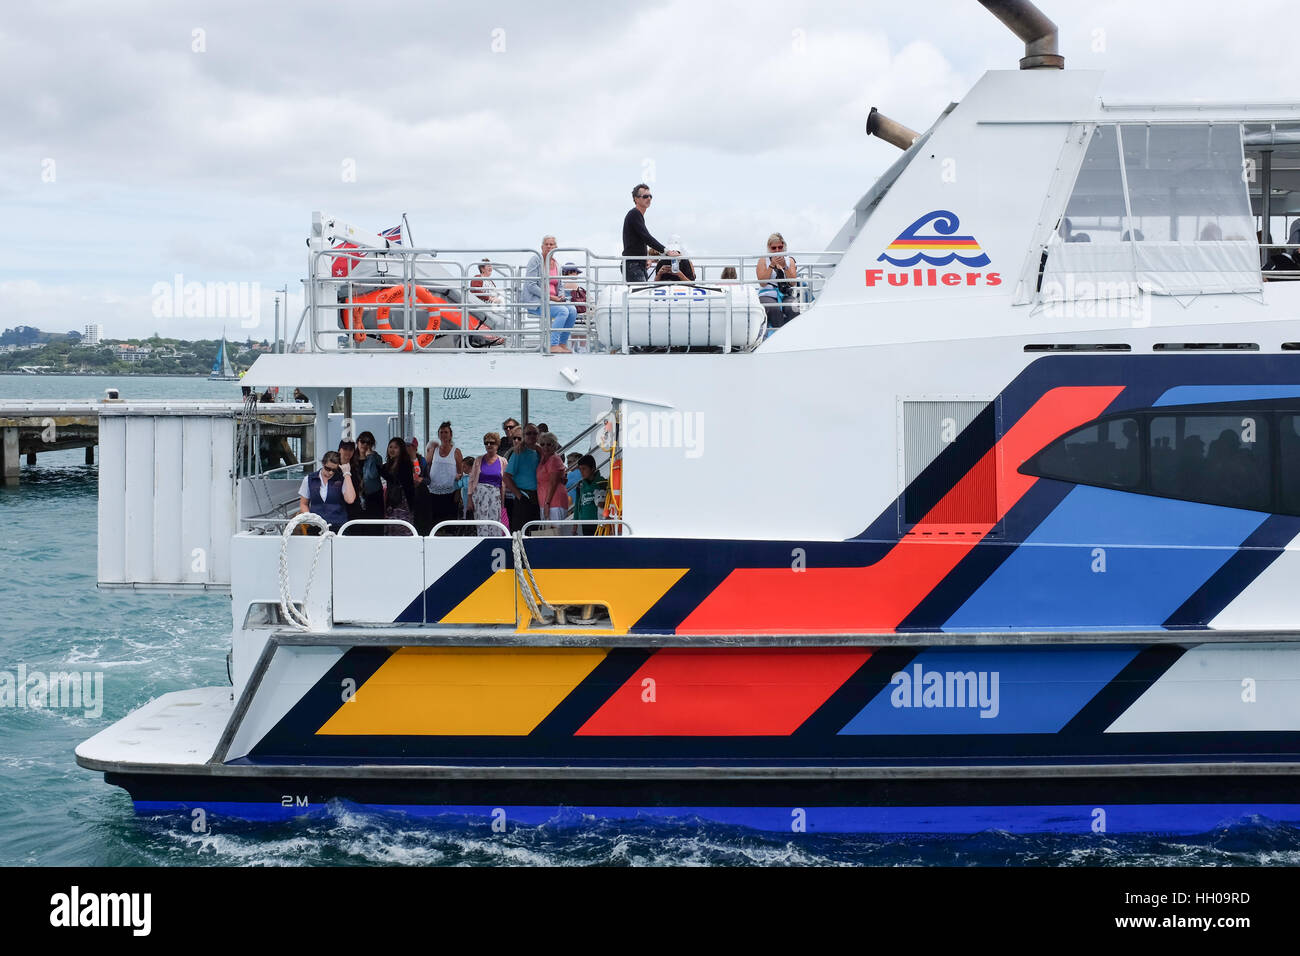 A Fullers ferry that runs between Auckland and Devonport in New Zealand. Stock Photo